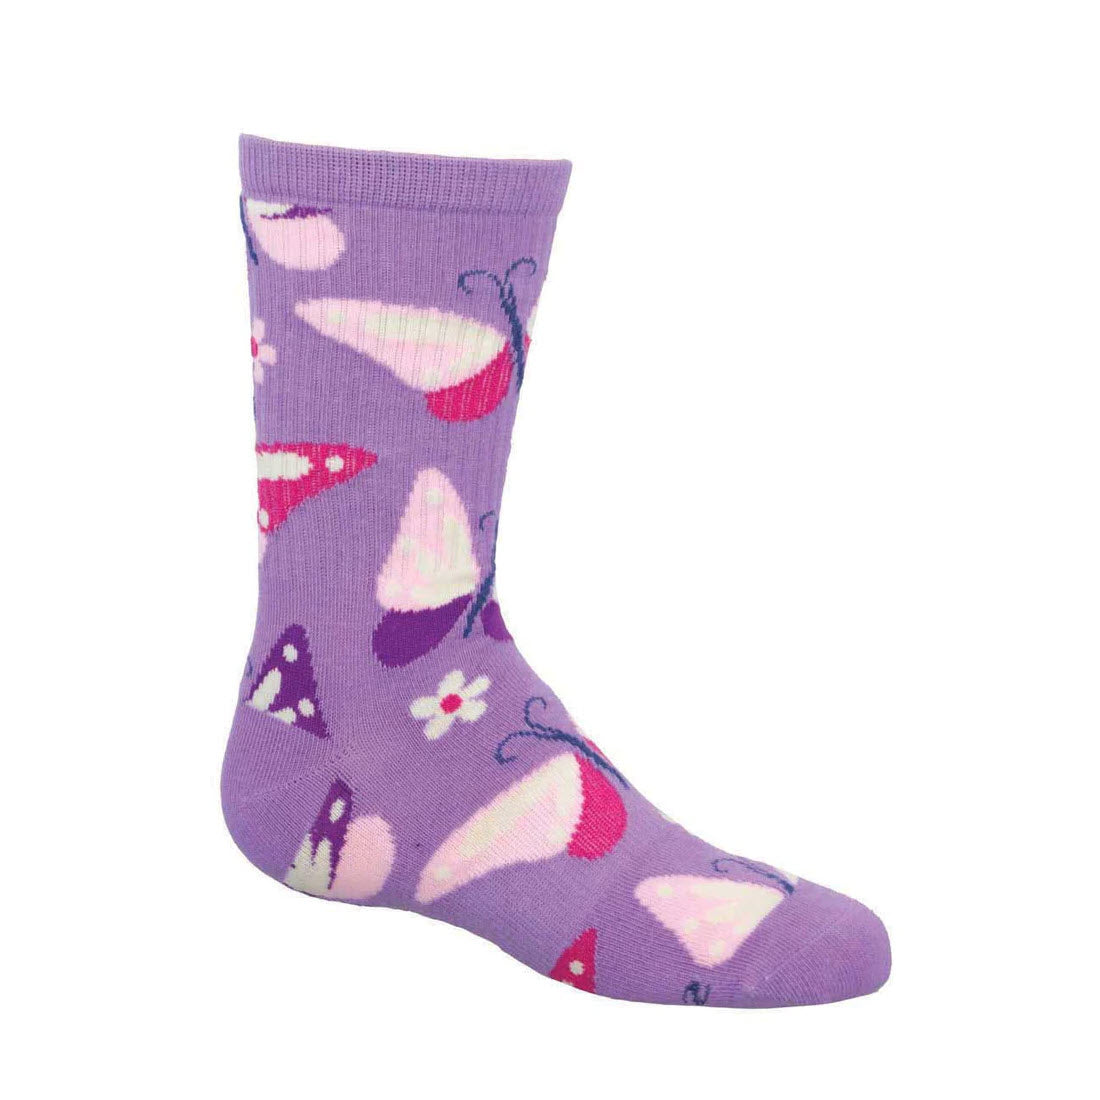 A single purple Socksmith Butterfly Flutters Crew Sock displayed against white feet.